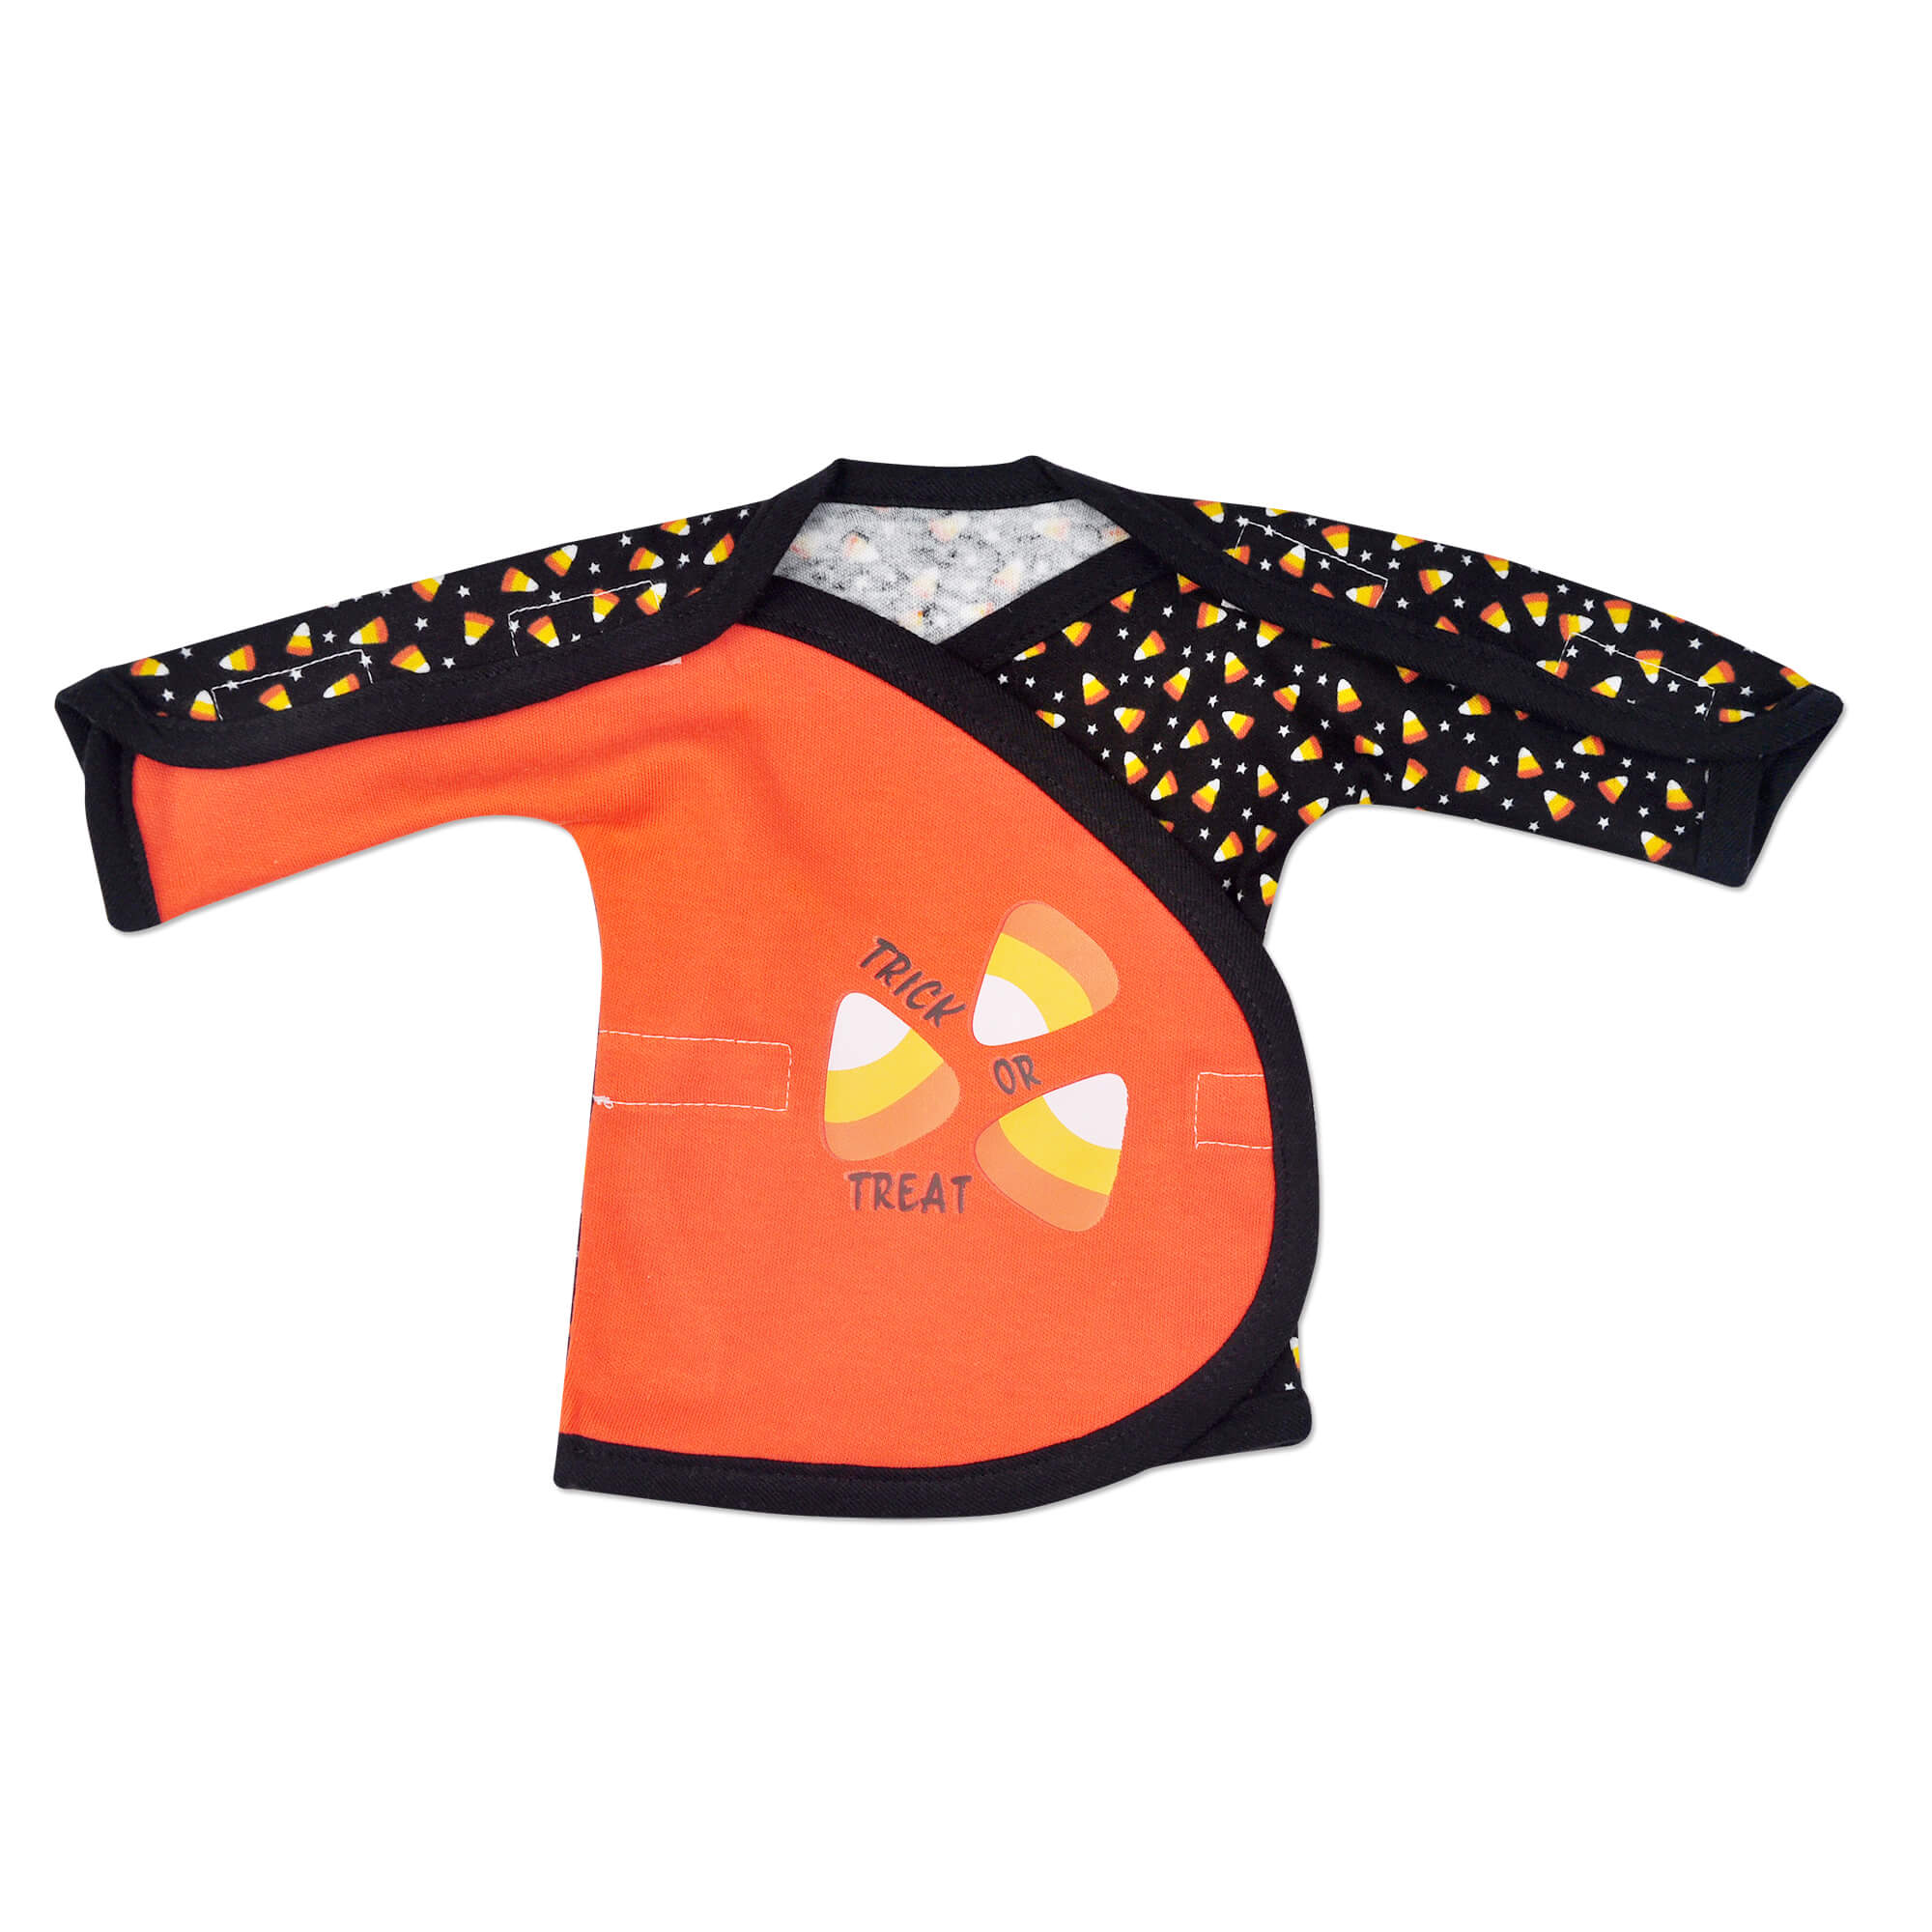 Shop the Largest selection of NICU-Friendly Preemie Clothes and